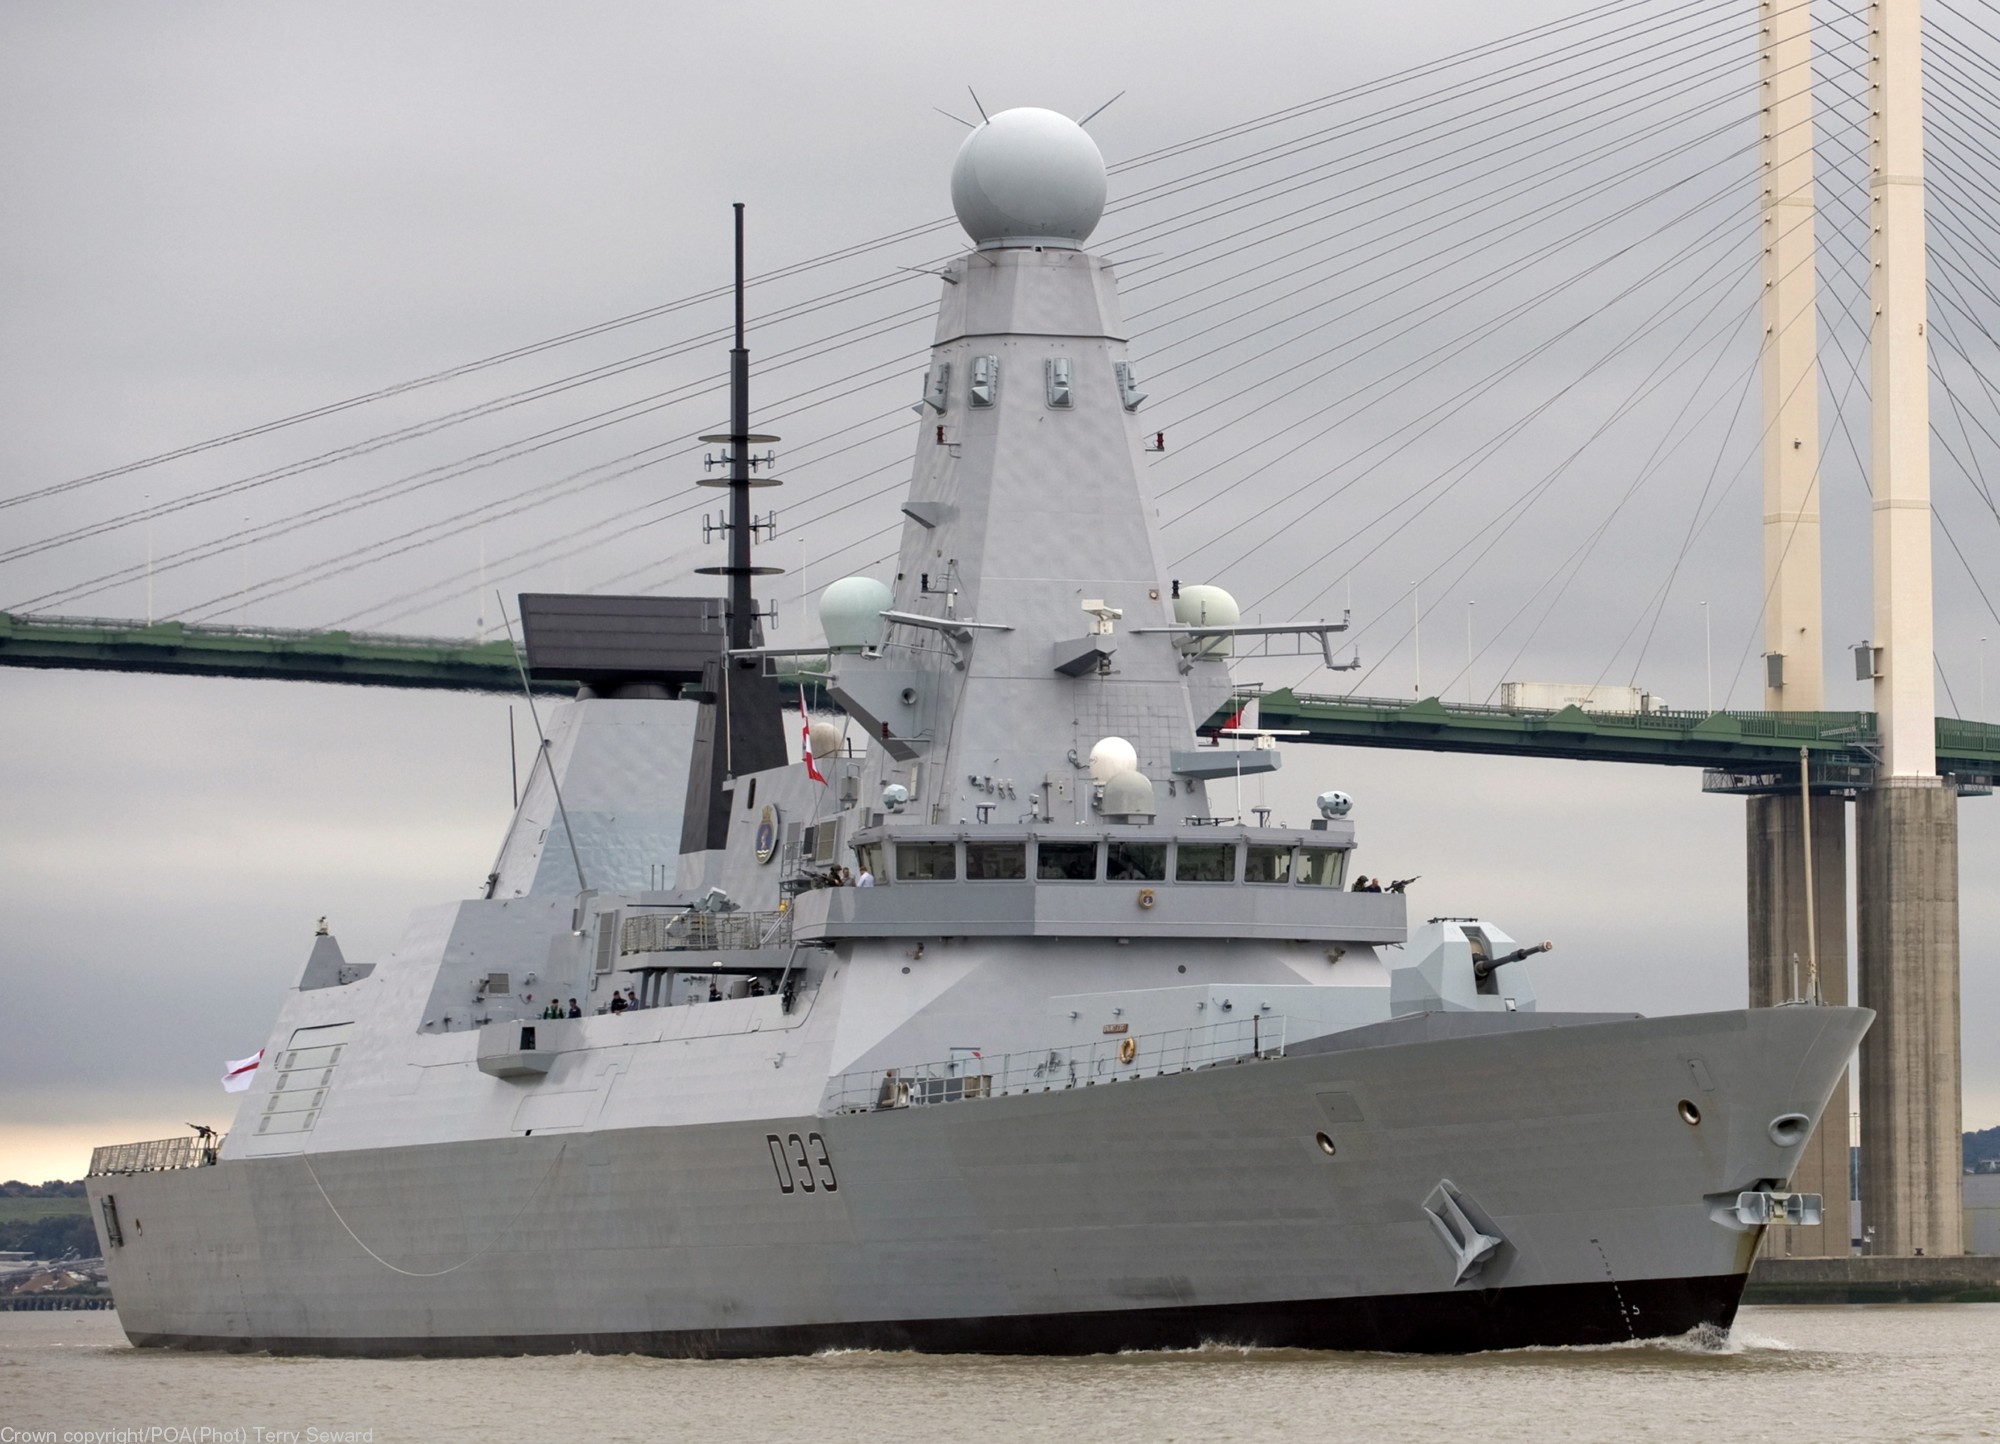 hms dauntless d-33 type 45 daring class guided missile destroyer royal navy sea viper paams 13